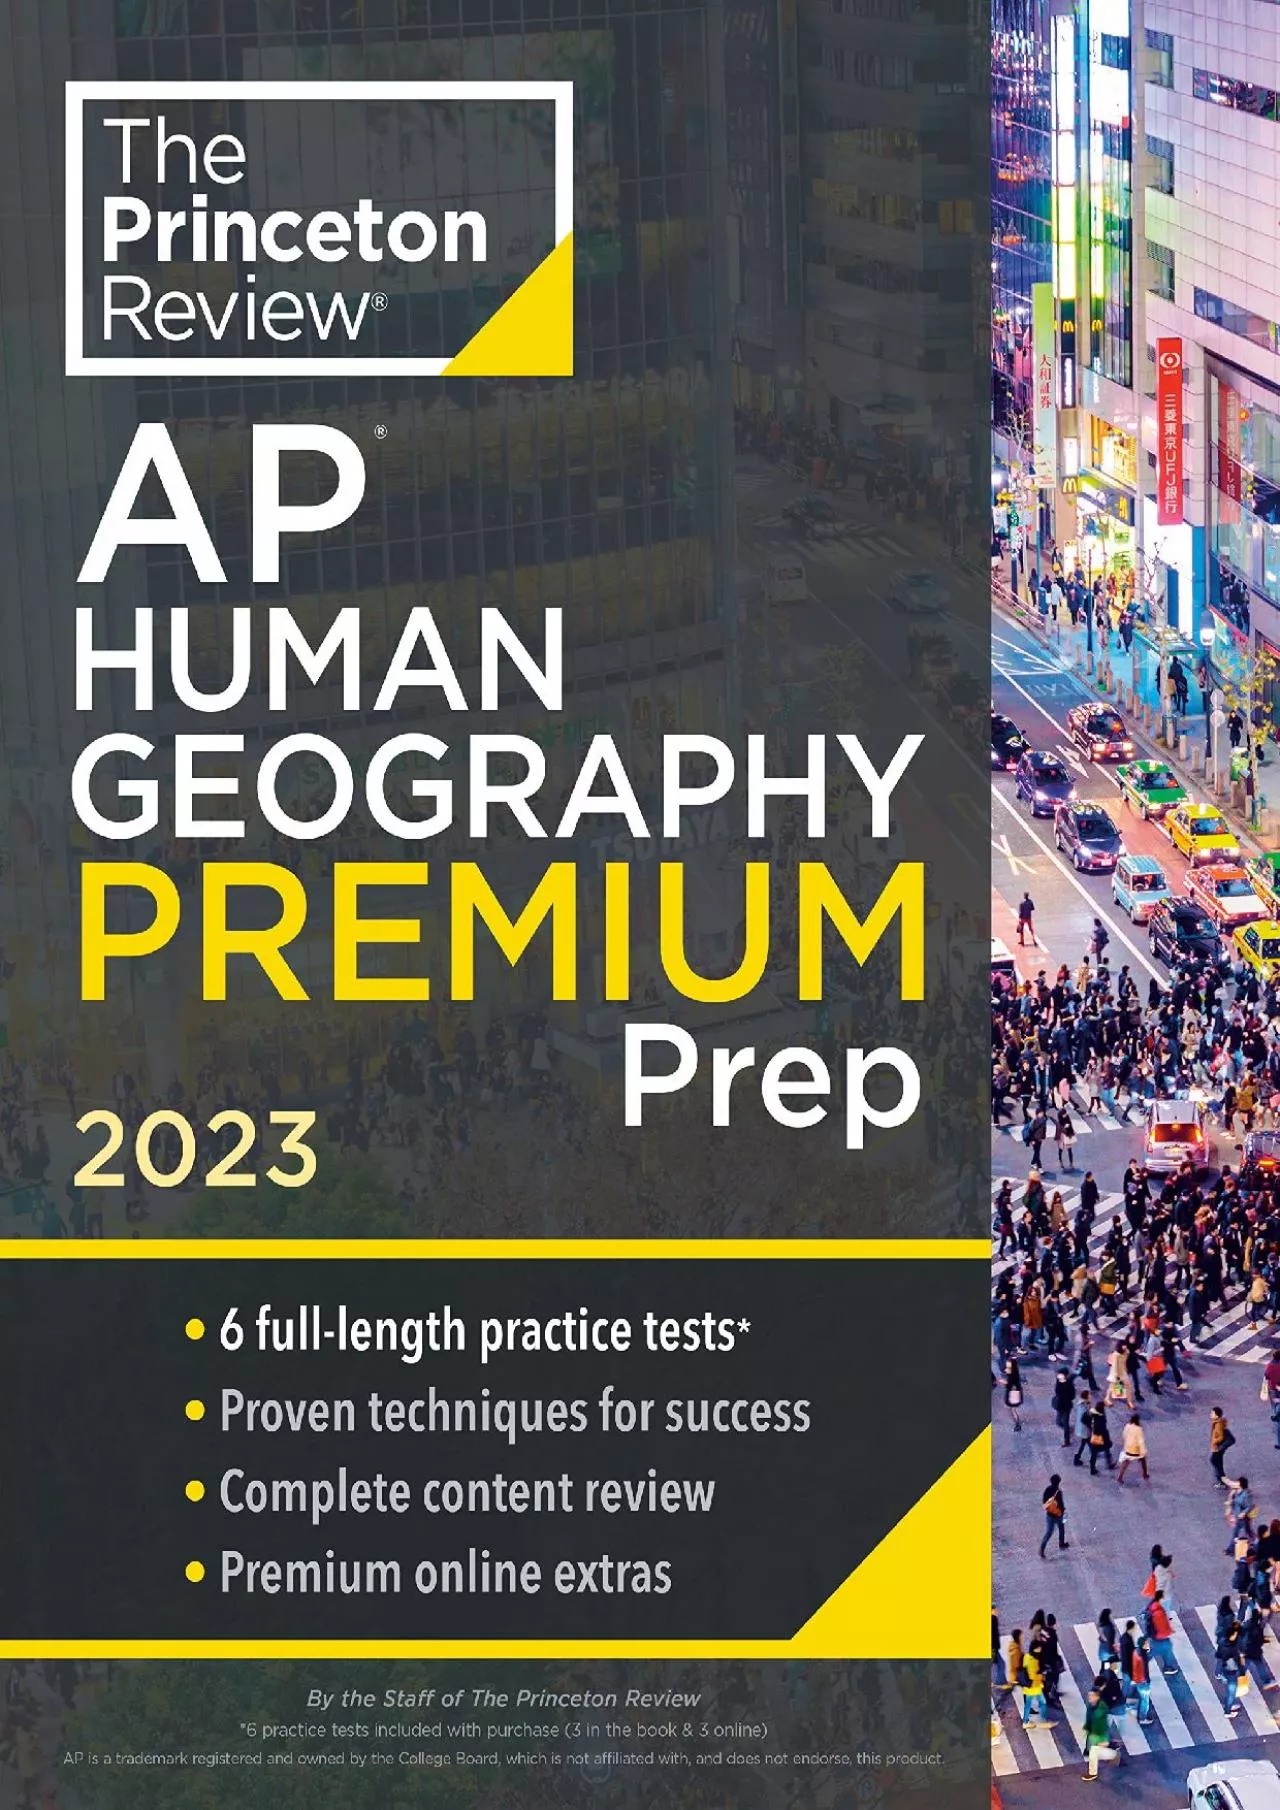 [READ] Princeton Review AP Human Geography Premium Prep, 2023: 6 Practice Tests + Complete